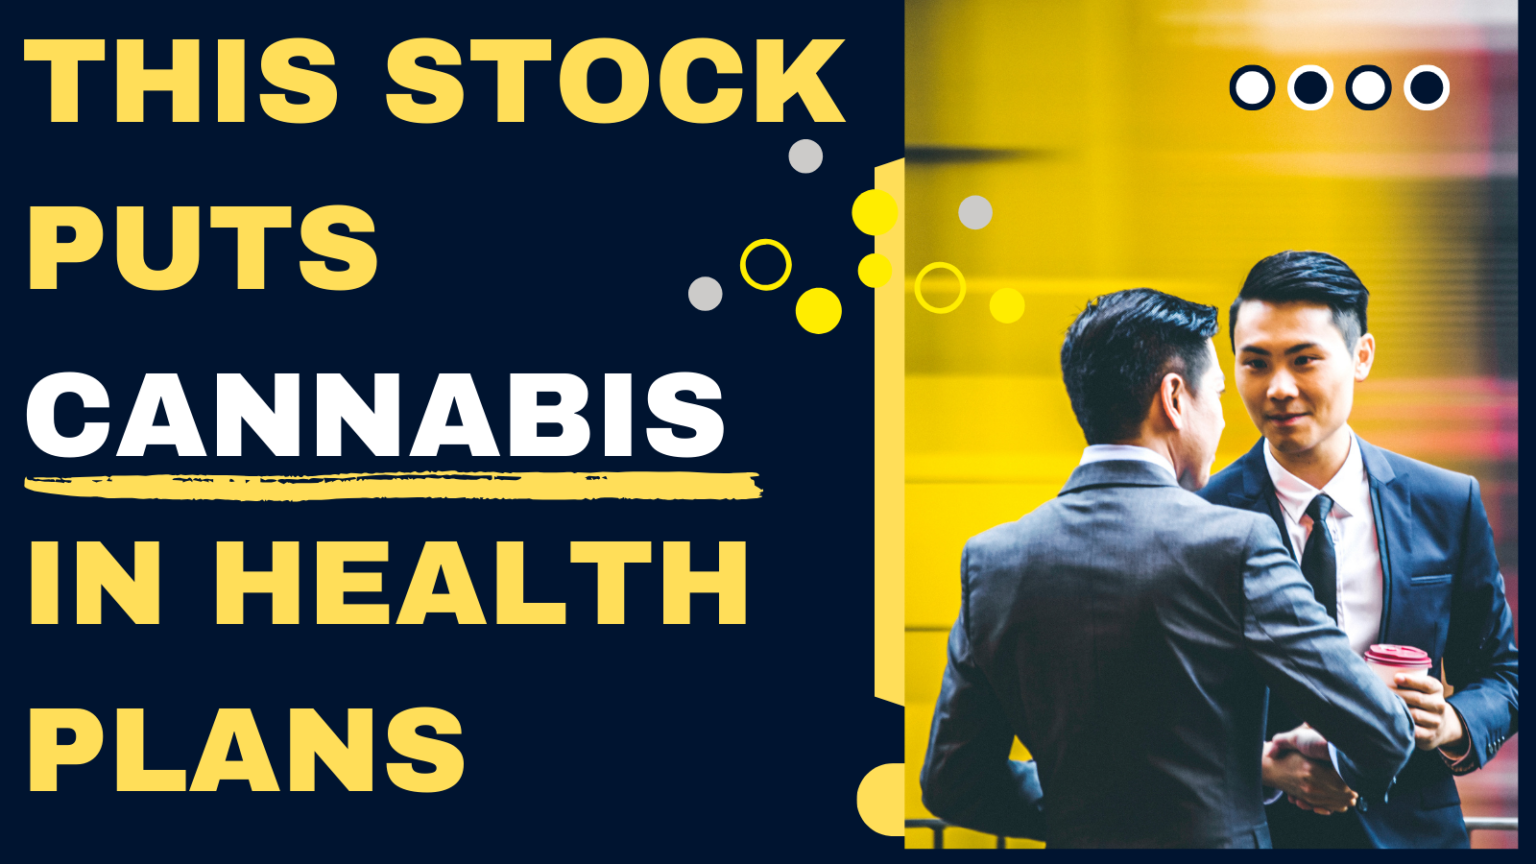 This stock puts cannabis into health plans